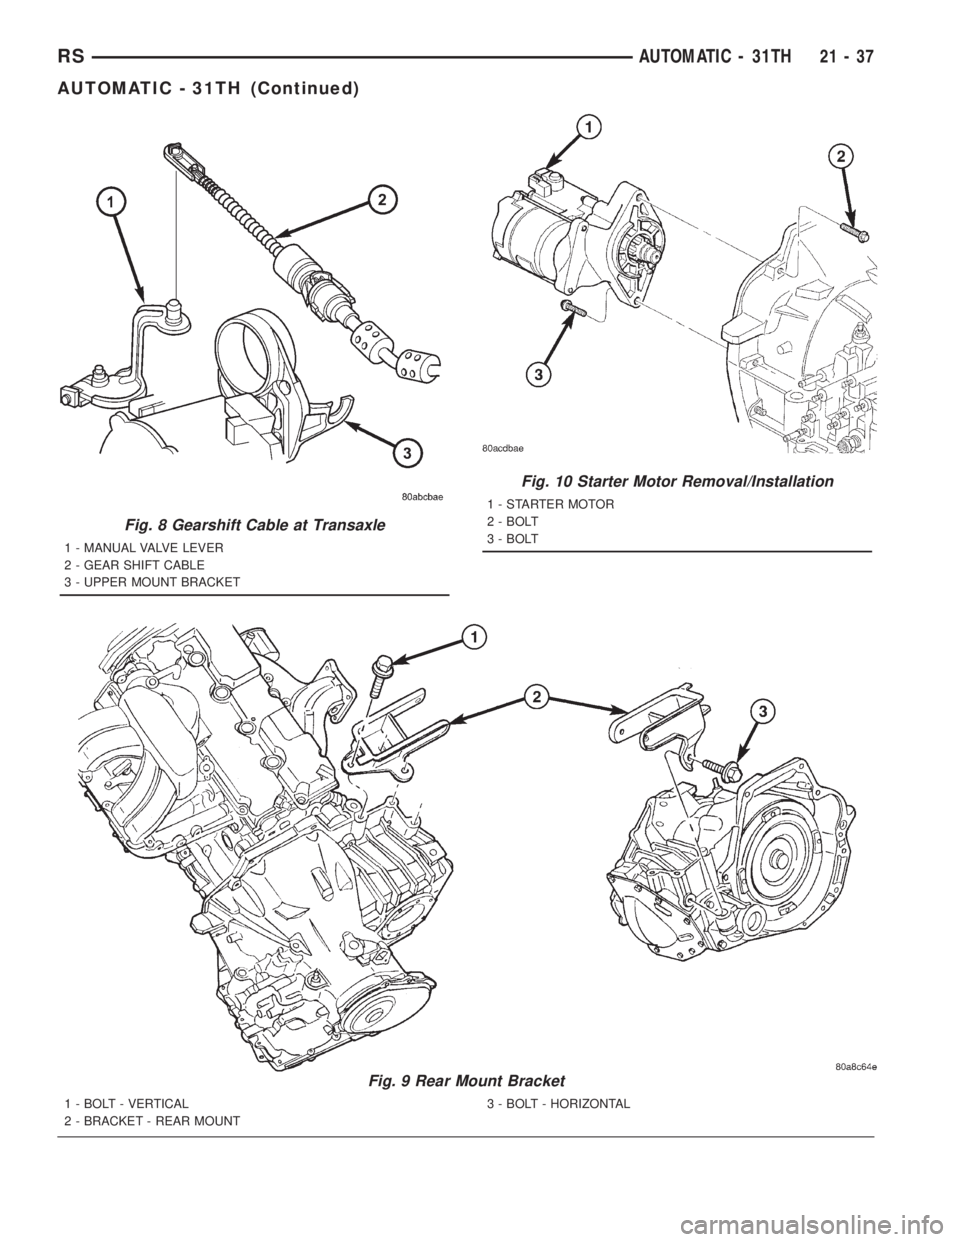 CHRYSLER VOYAGER 2001  Service Manual Fig. 8 Gearshift Cable at Transaxle
1 - MANUAL VALVE LEVER
2 - GEAR SHIFT CABLE
3 - UPPER MOUNT BRACKET
Fig. 9 Rear Mount Bracket
1 - BOLT - VERTICAL
2 - BRACKET - REAR MOUNT3 - BOLT - HORIZONTAL
Fig.